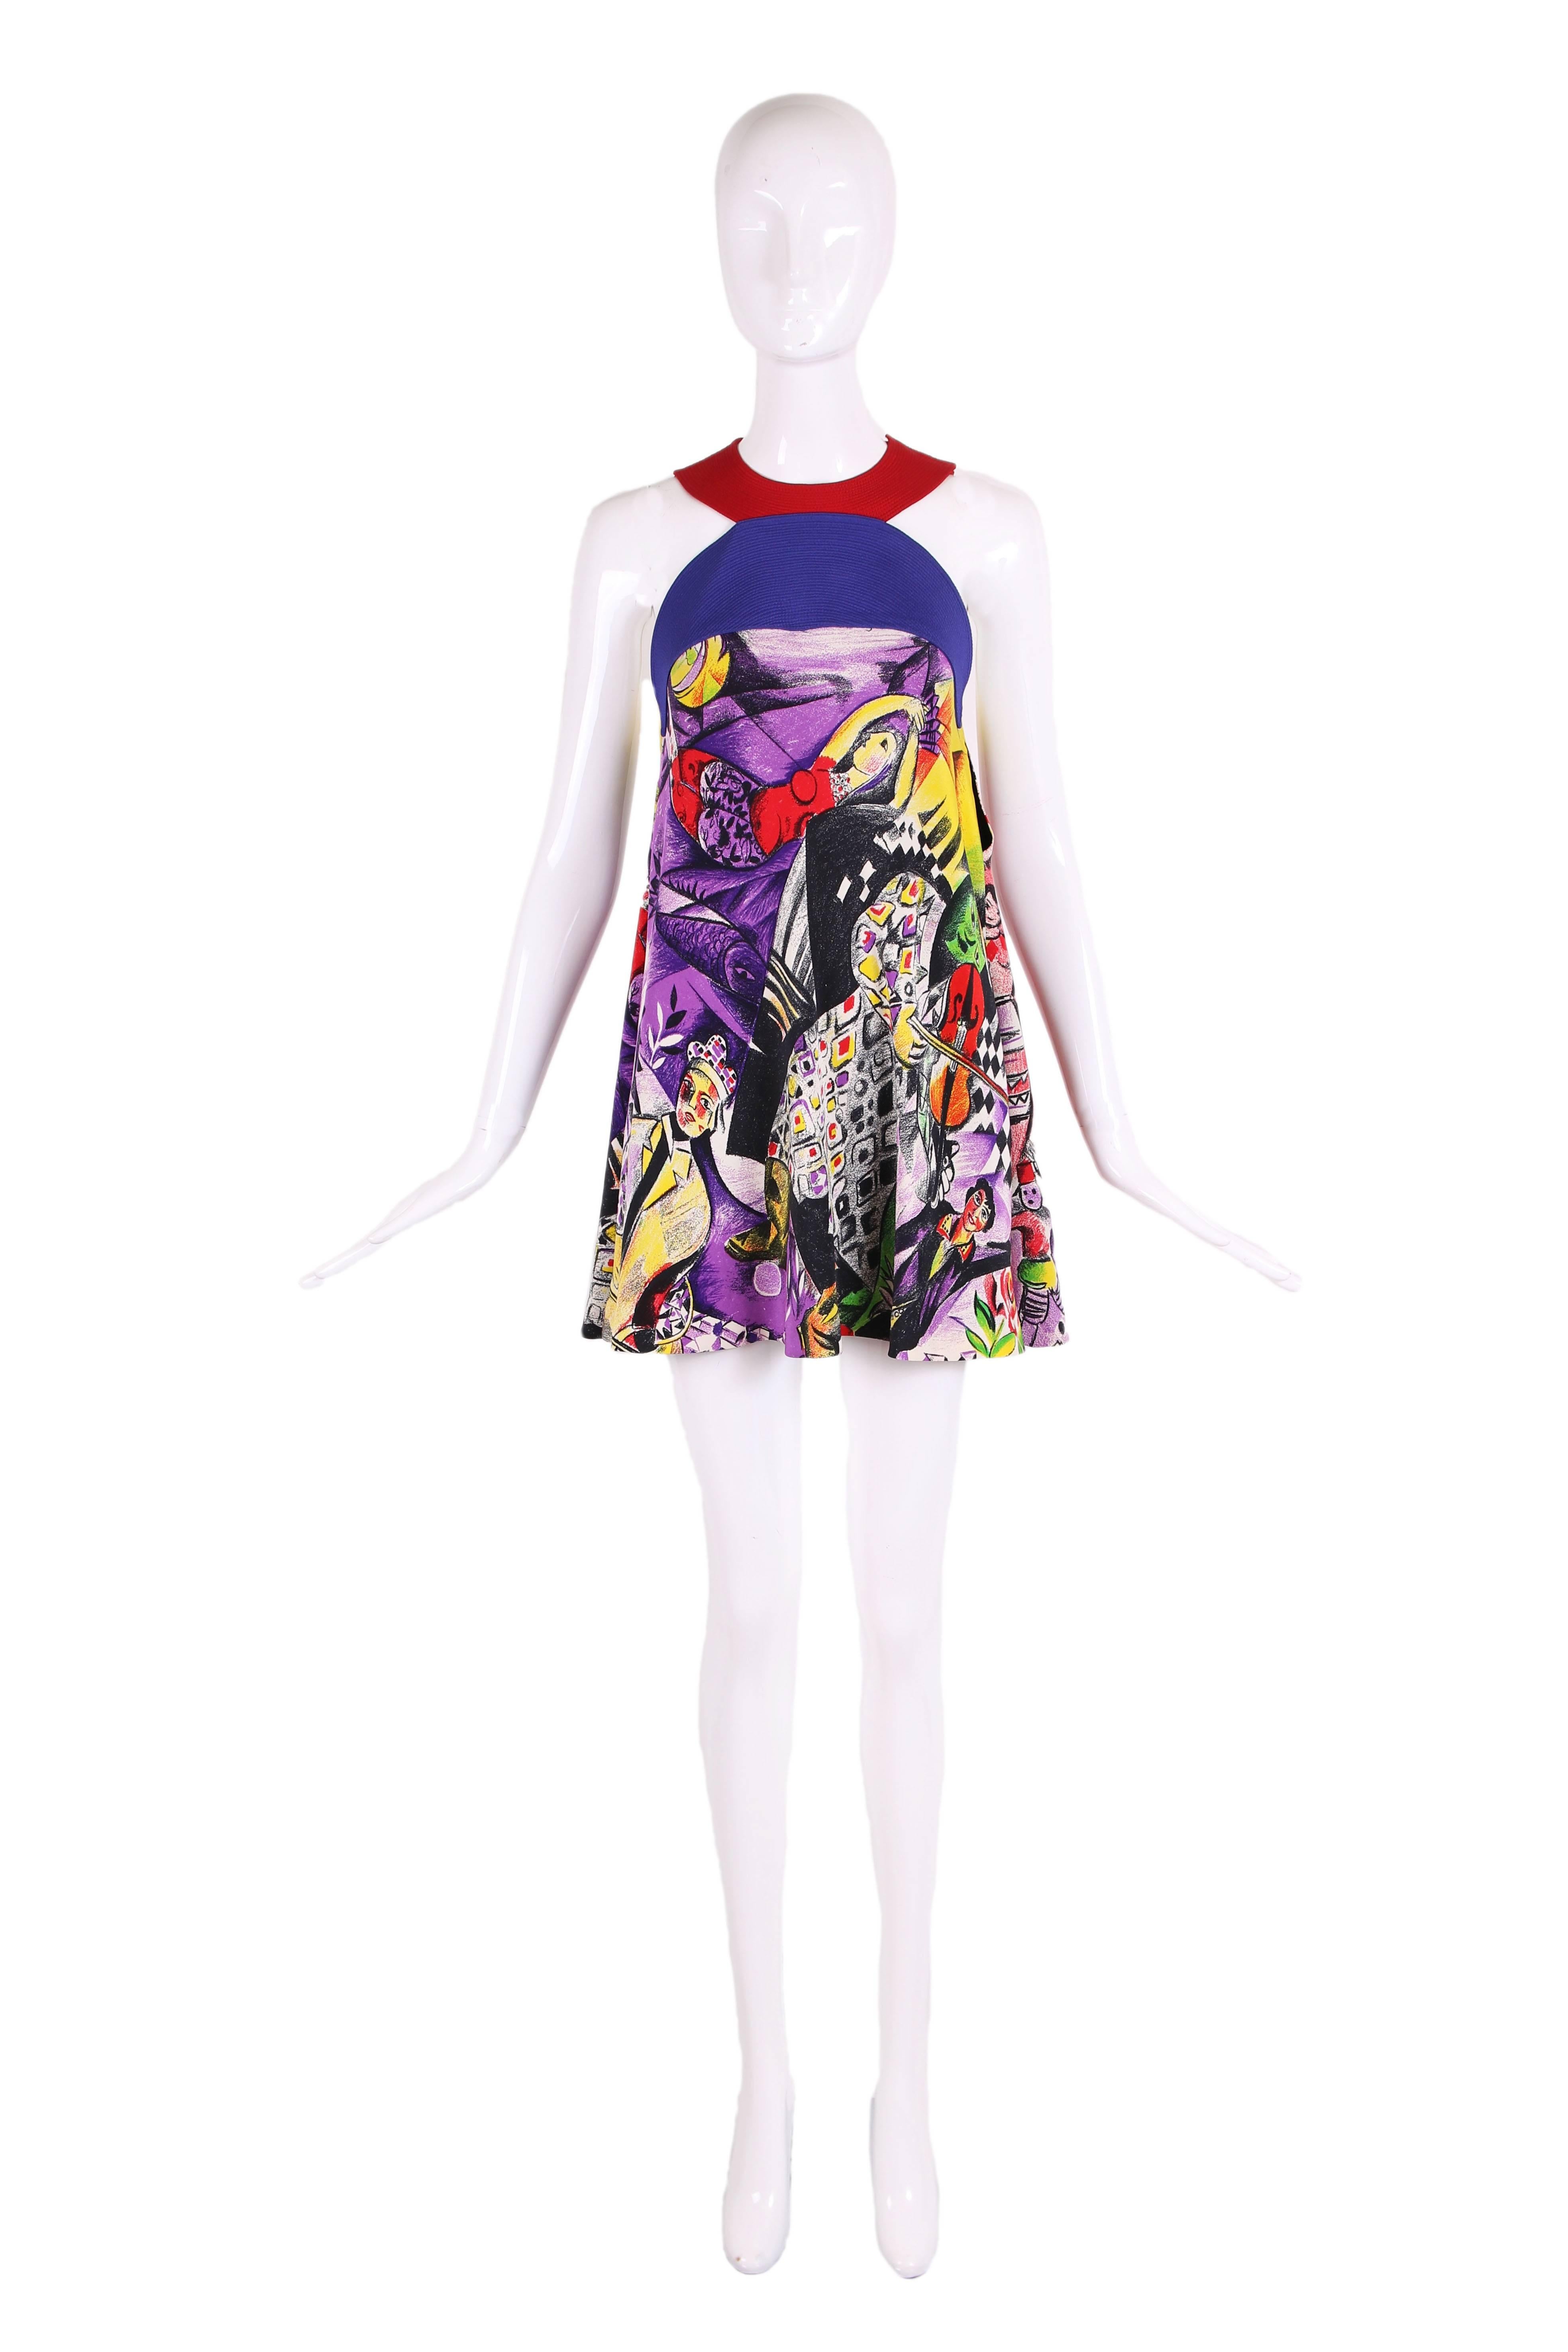 1992 Versace couture multi-colored silk mini dress featuring a print based on the works of Marc Chagall. Hidden snap closures at neck yoke and one hook and eye at the left side seam. In excellent condition.
MEASUREMENTS:
Bust - 34"
Length -